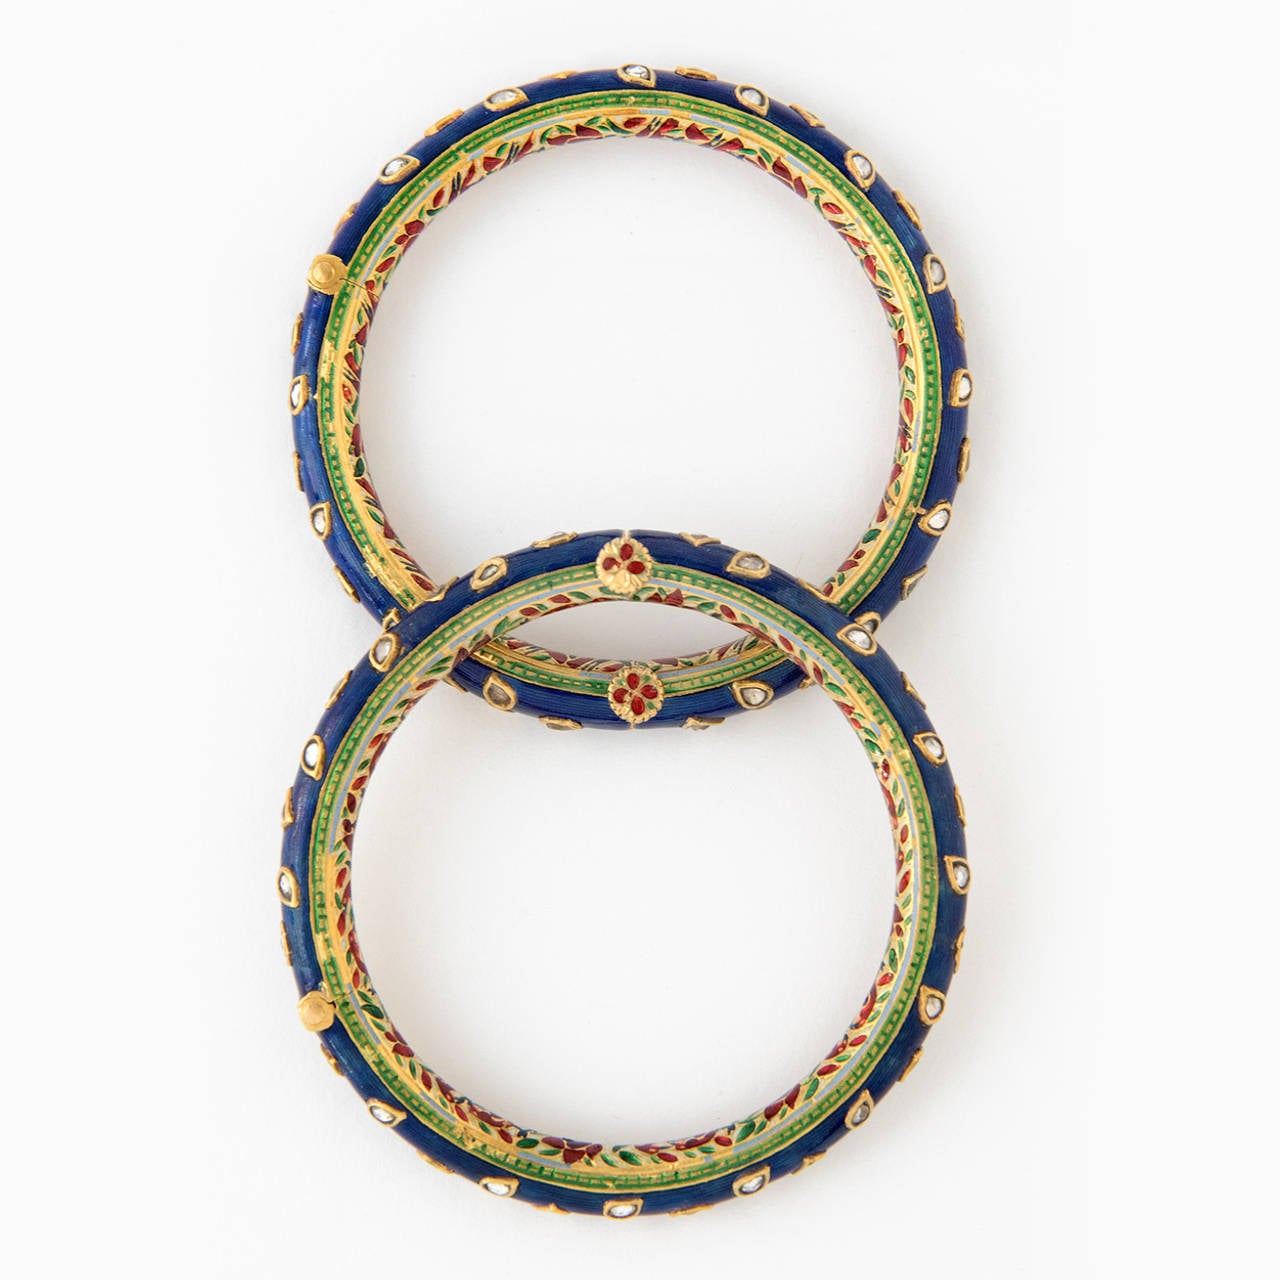 A pair of gold bangles, CHURIN, of which the outer side is decorated with dark blue, Nil Zamin enamel, kundan set with white sapphire in gold collets, shaped like leaf and flower buds. The inside is decorated in a floral pattern with Safed Chalwan